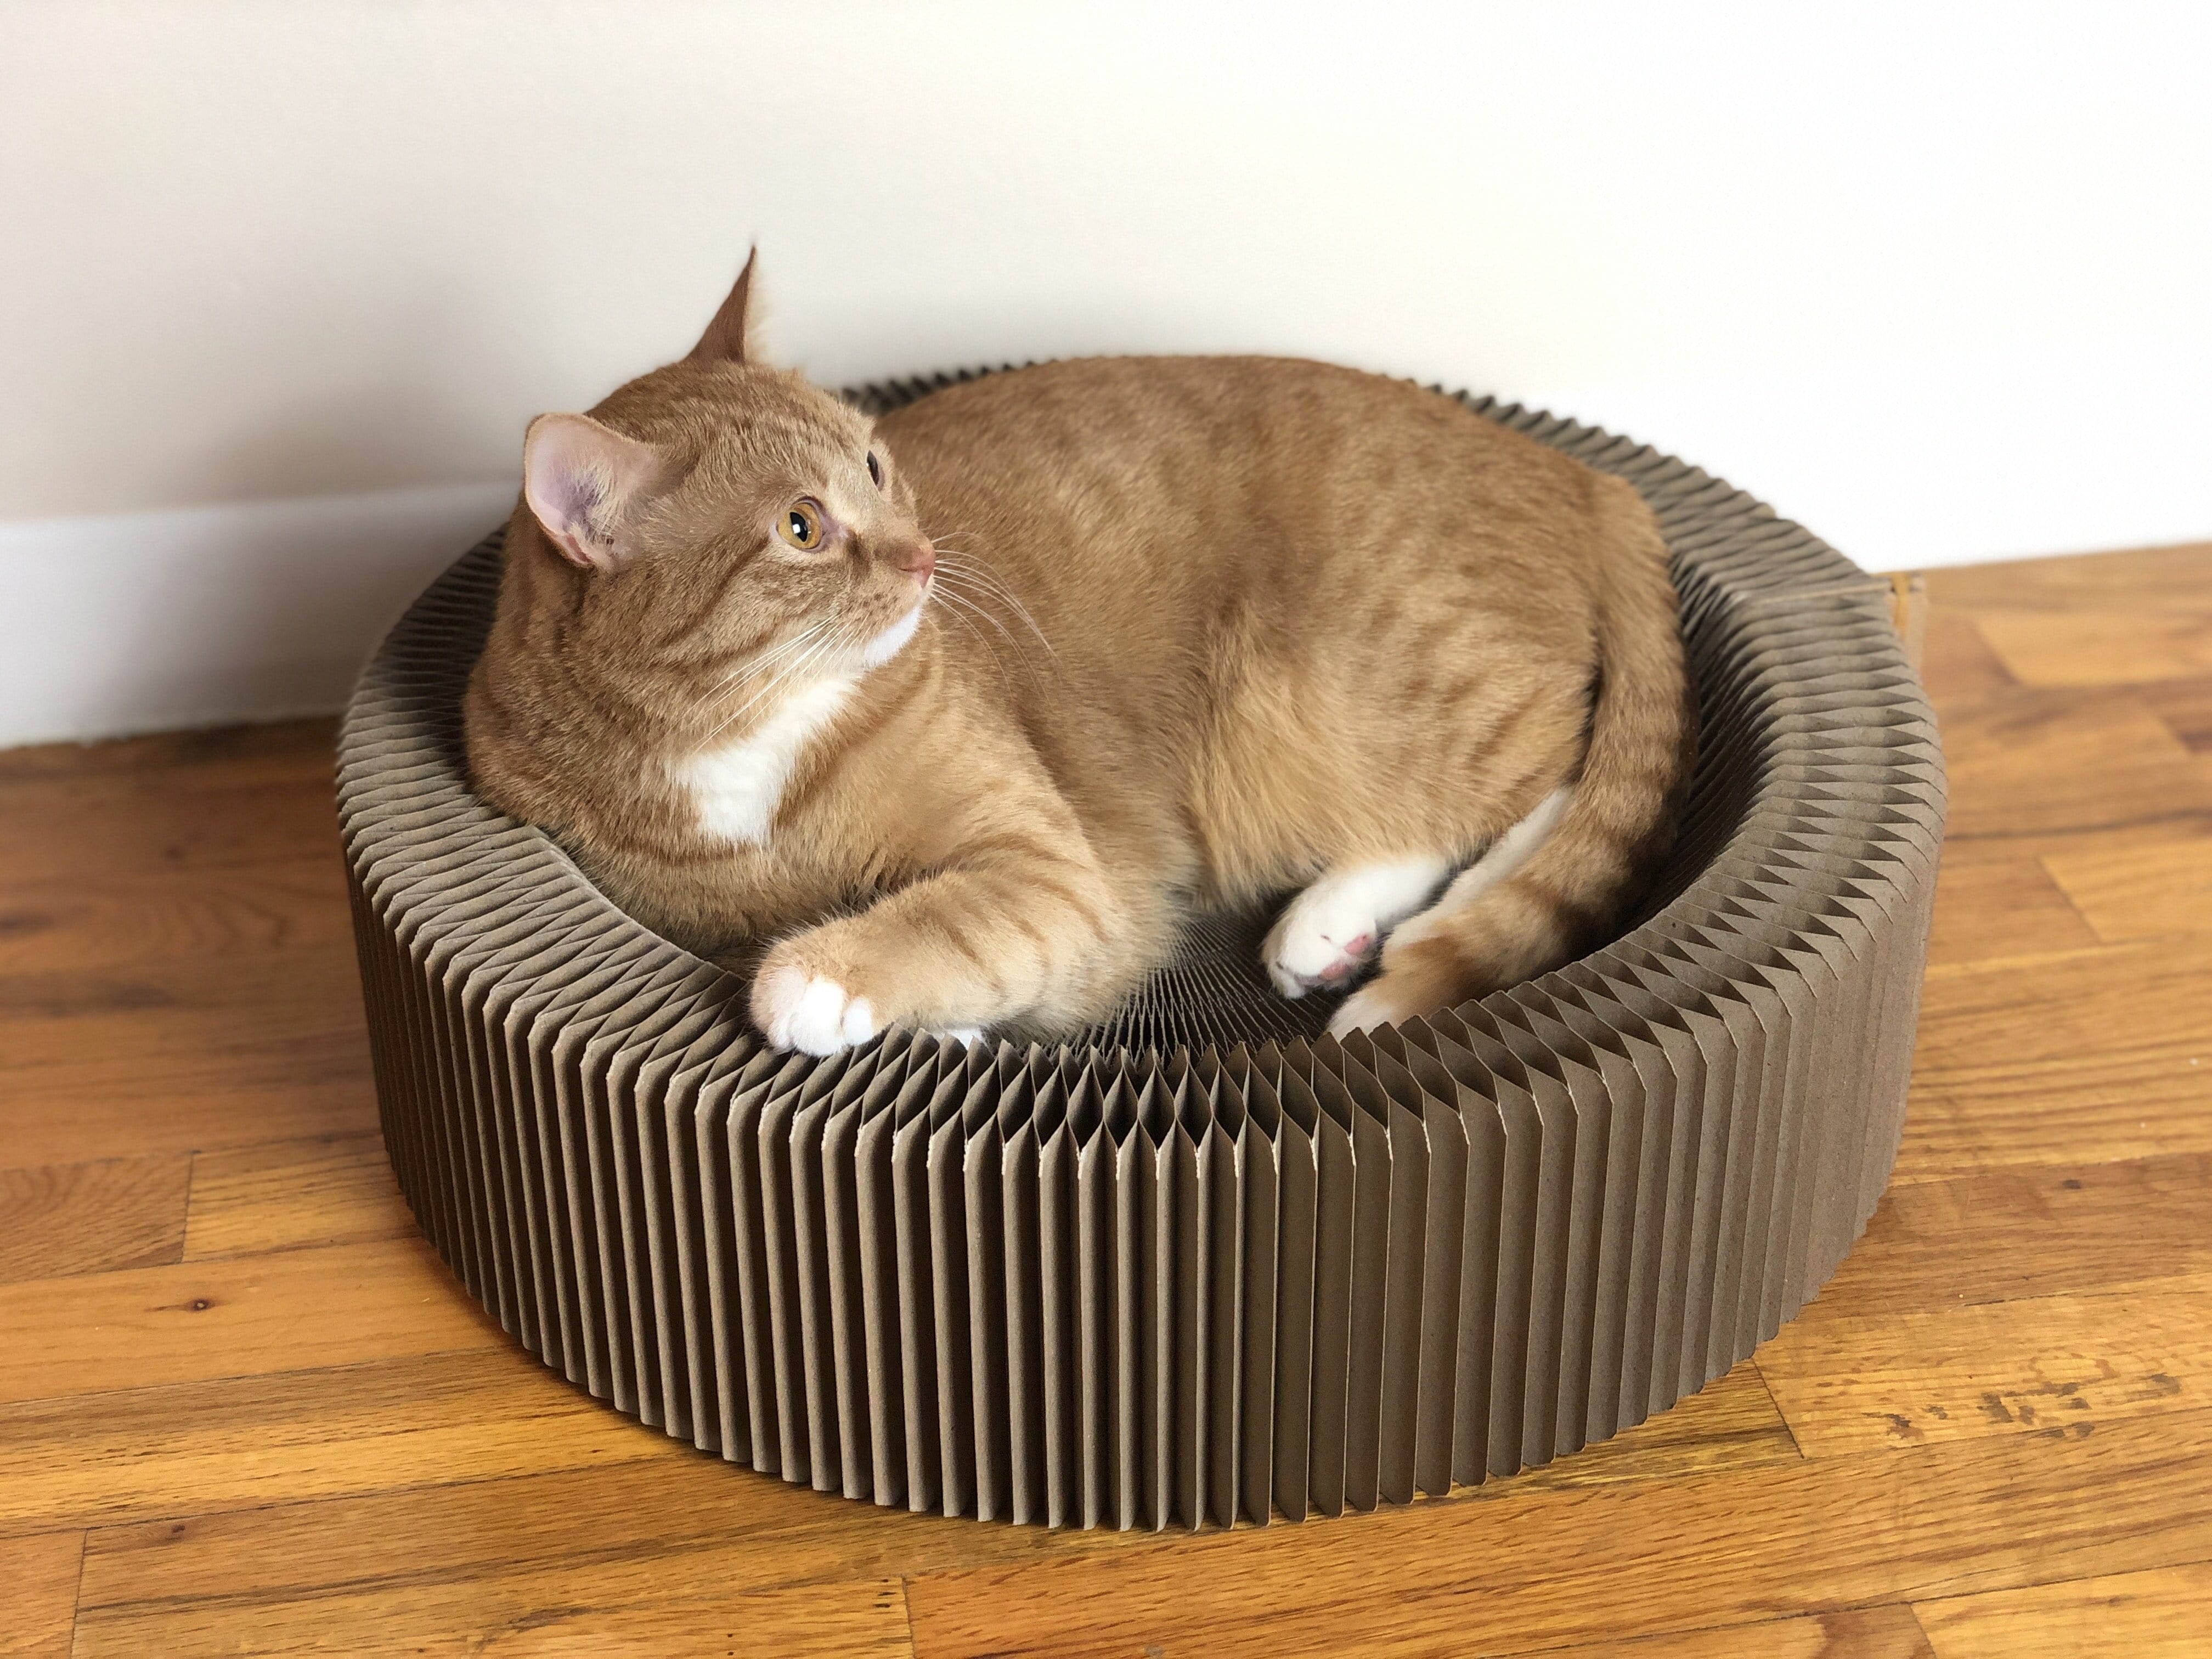 The Accordion Travel Cardboard Bed & Scratcher